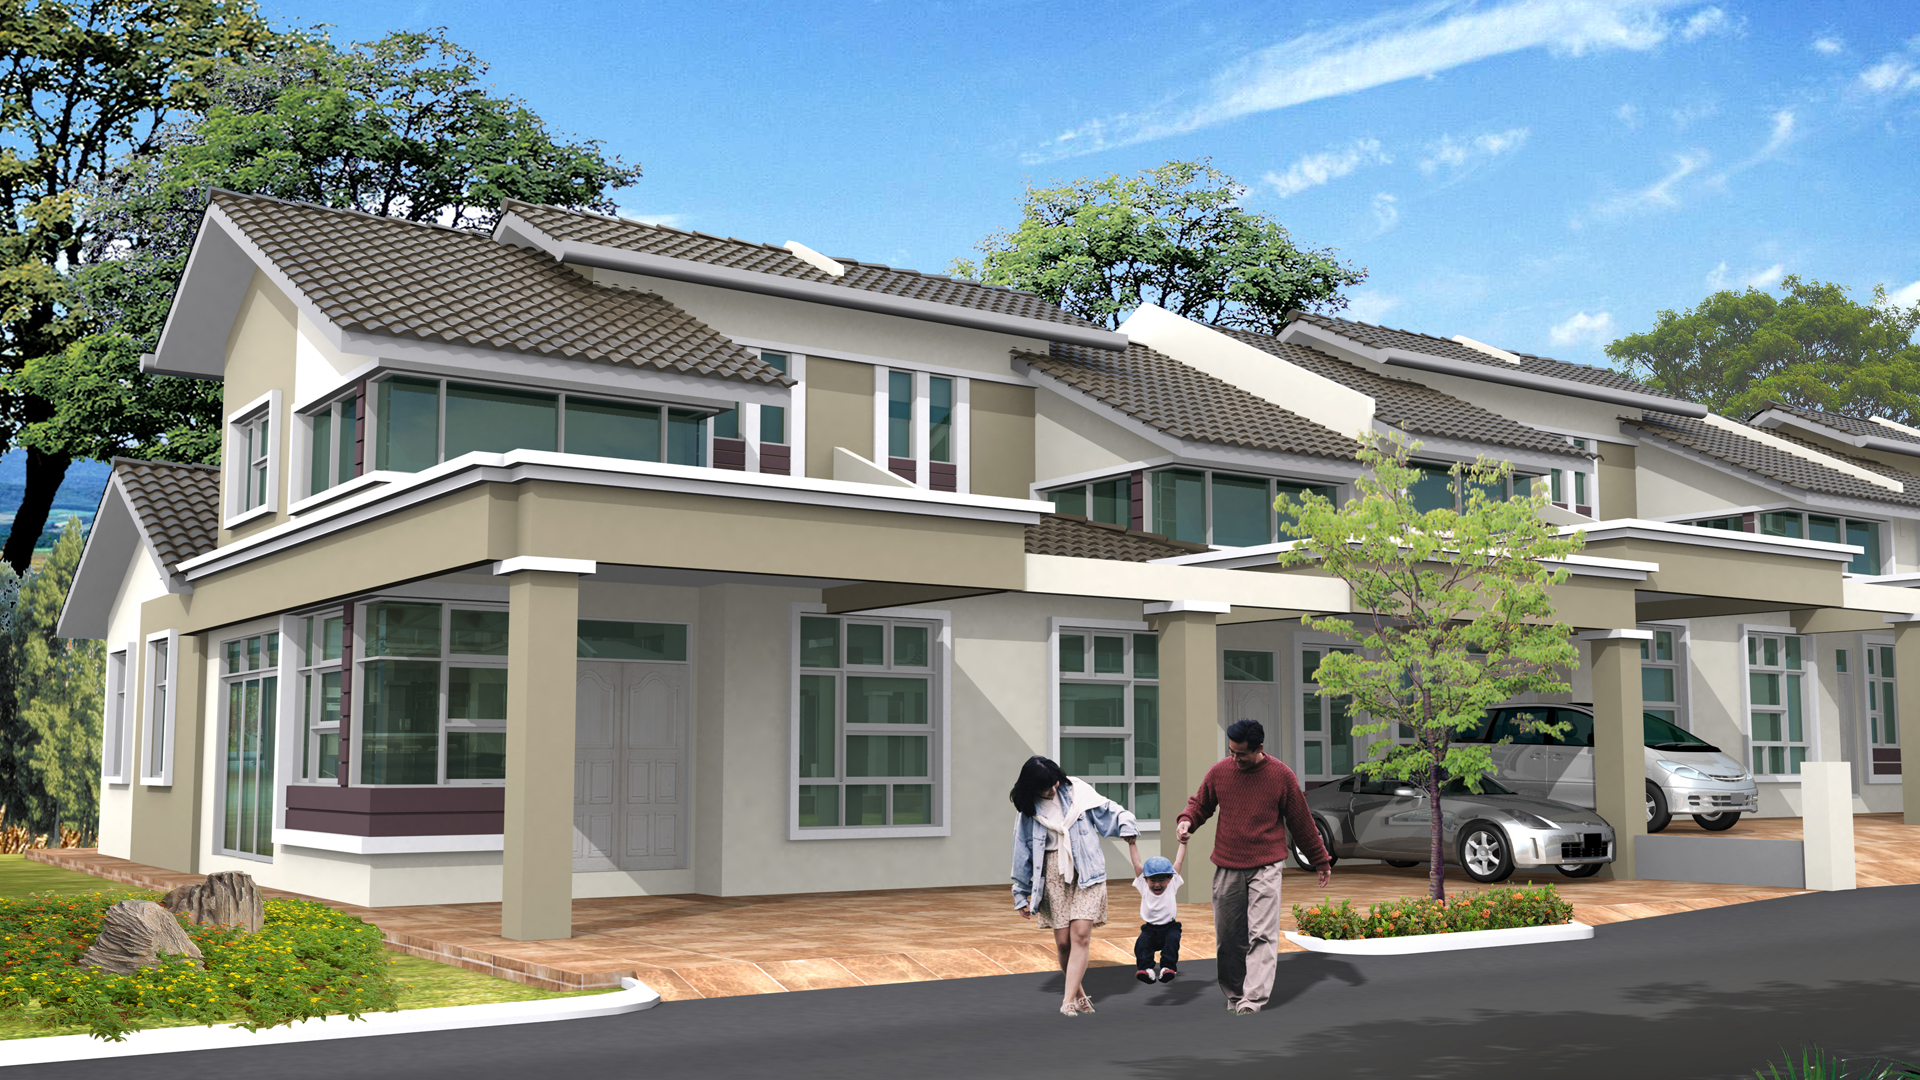 Taman Kasa Heights - Housing Property Projects in Alor ...